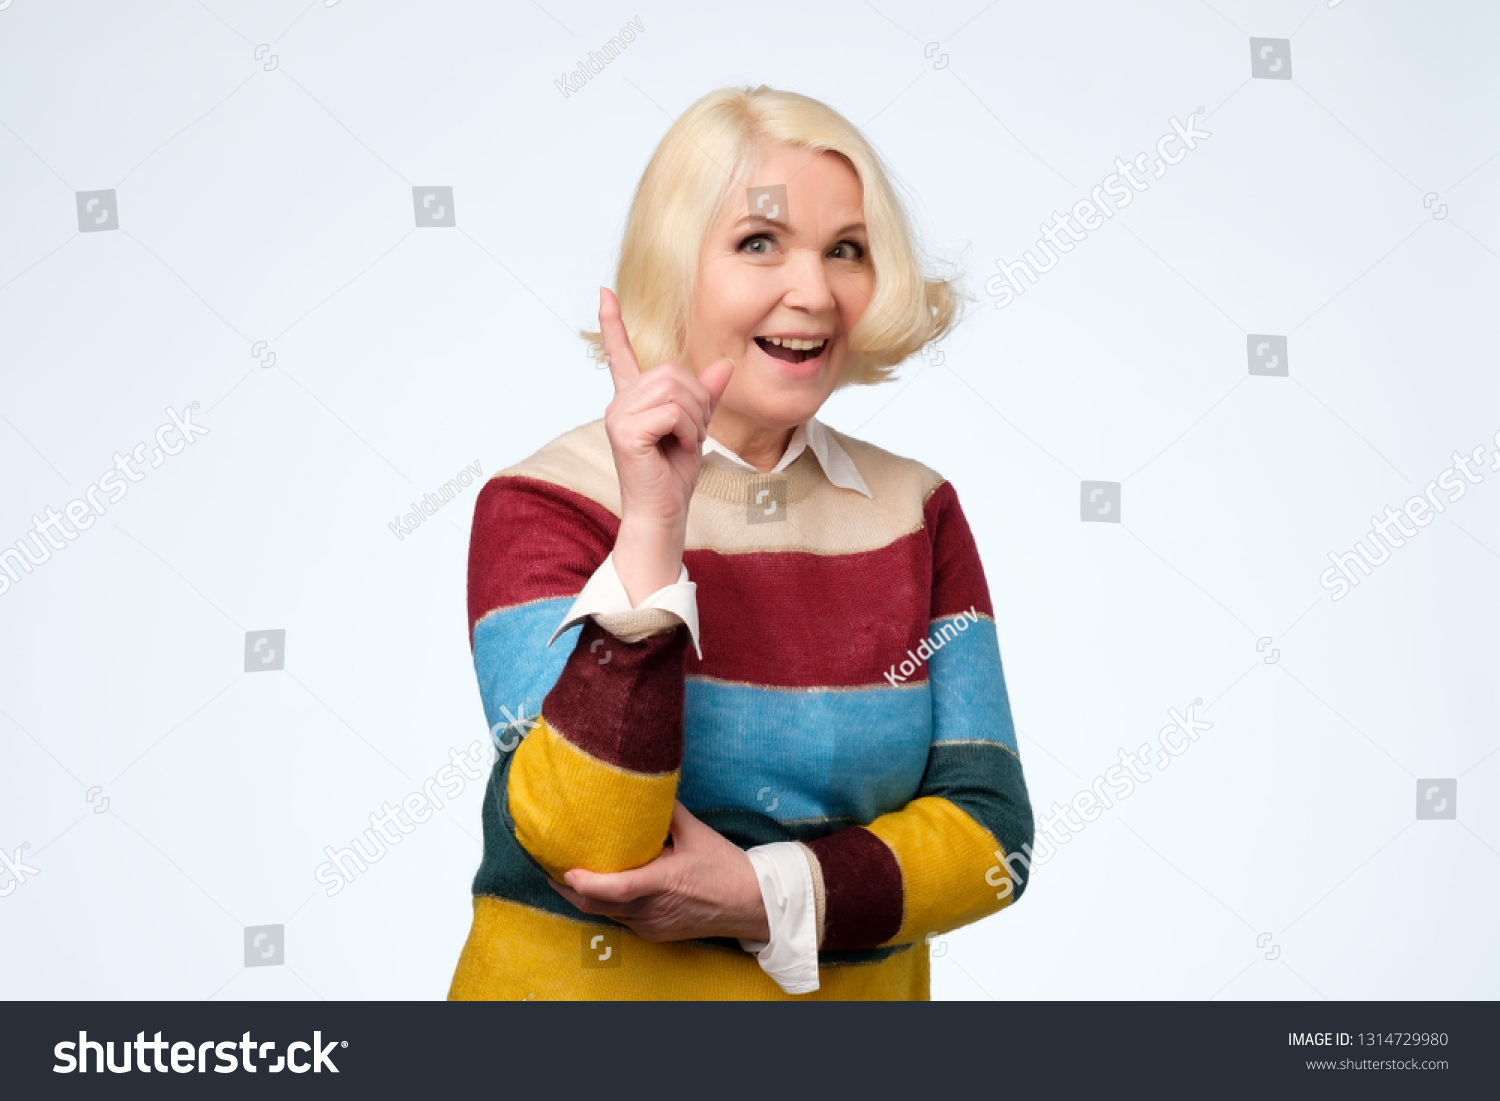 emotional expressive grandmother pointing with index finger up #1314729980